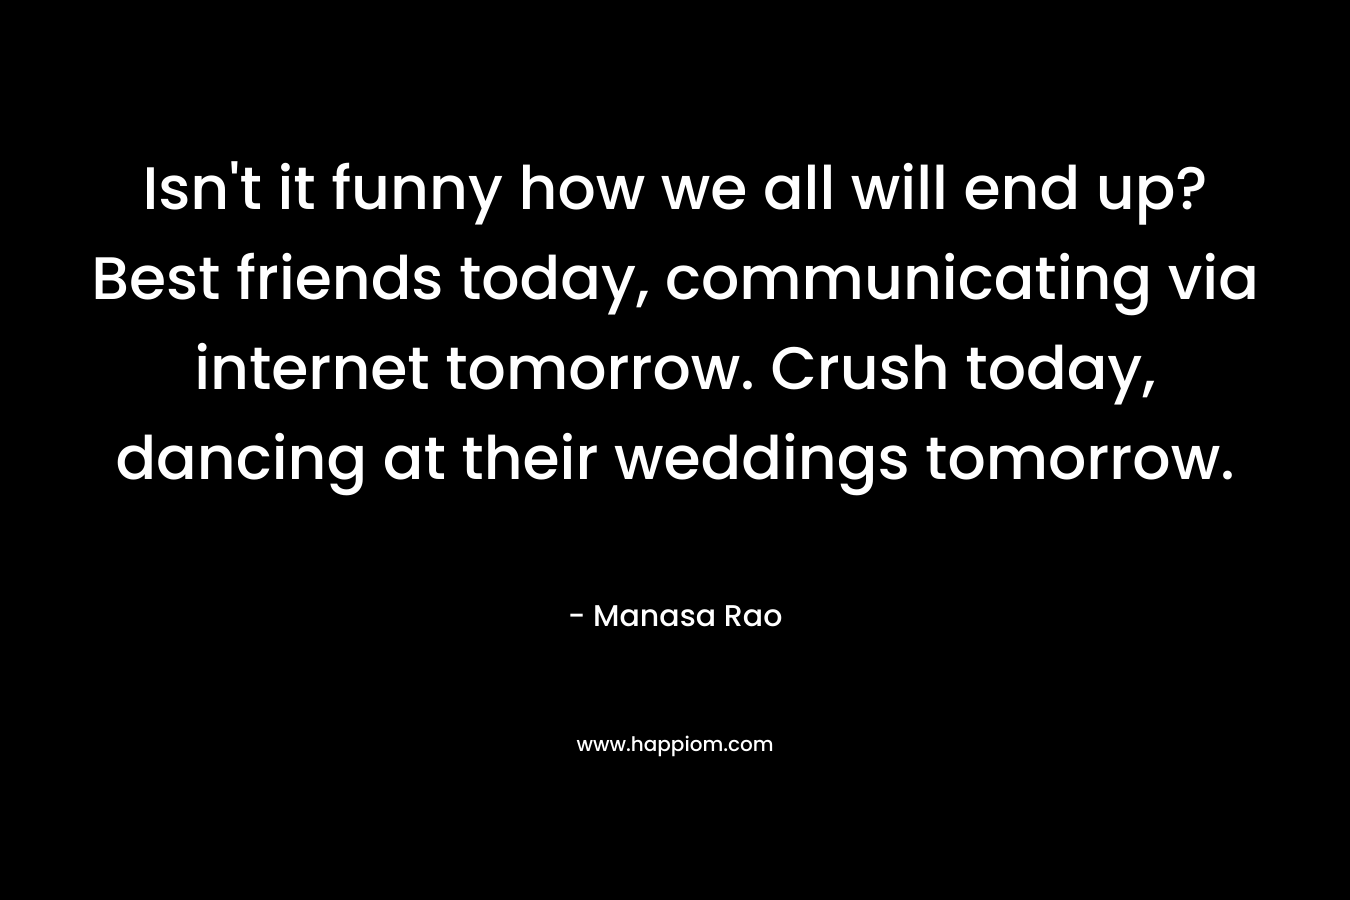 Isn’t it funny how we all will end up? Best friends today, communicating via internet tomorrow. Crush today, dancing at their weddings tomorrow. – Manasa Rao